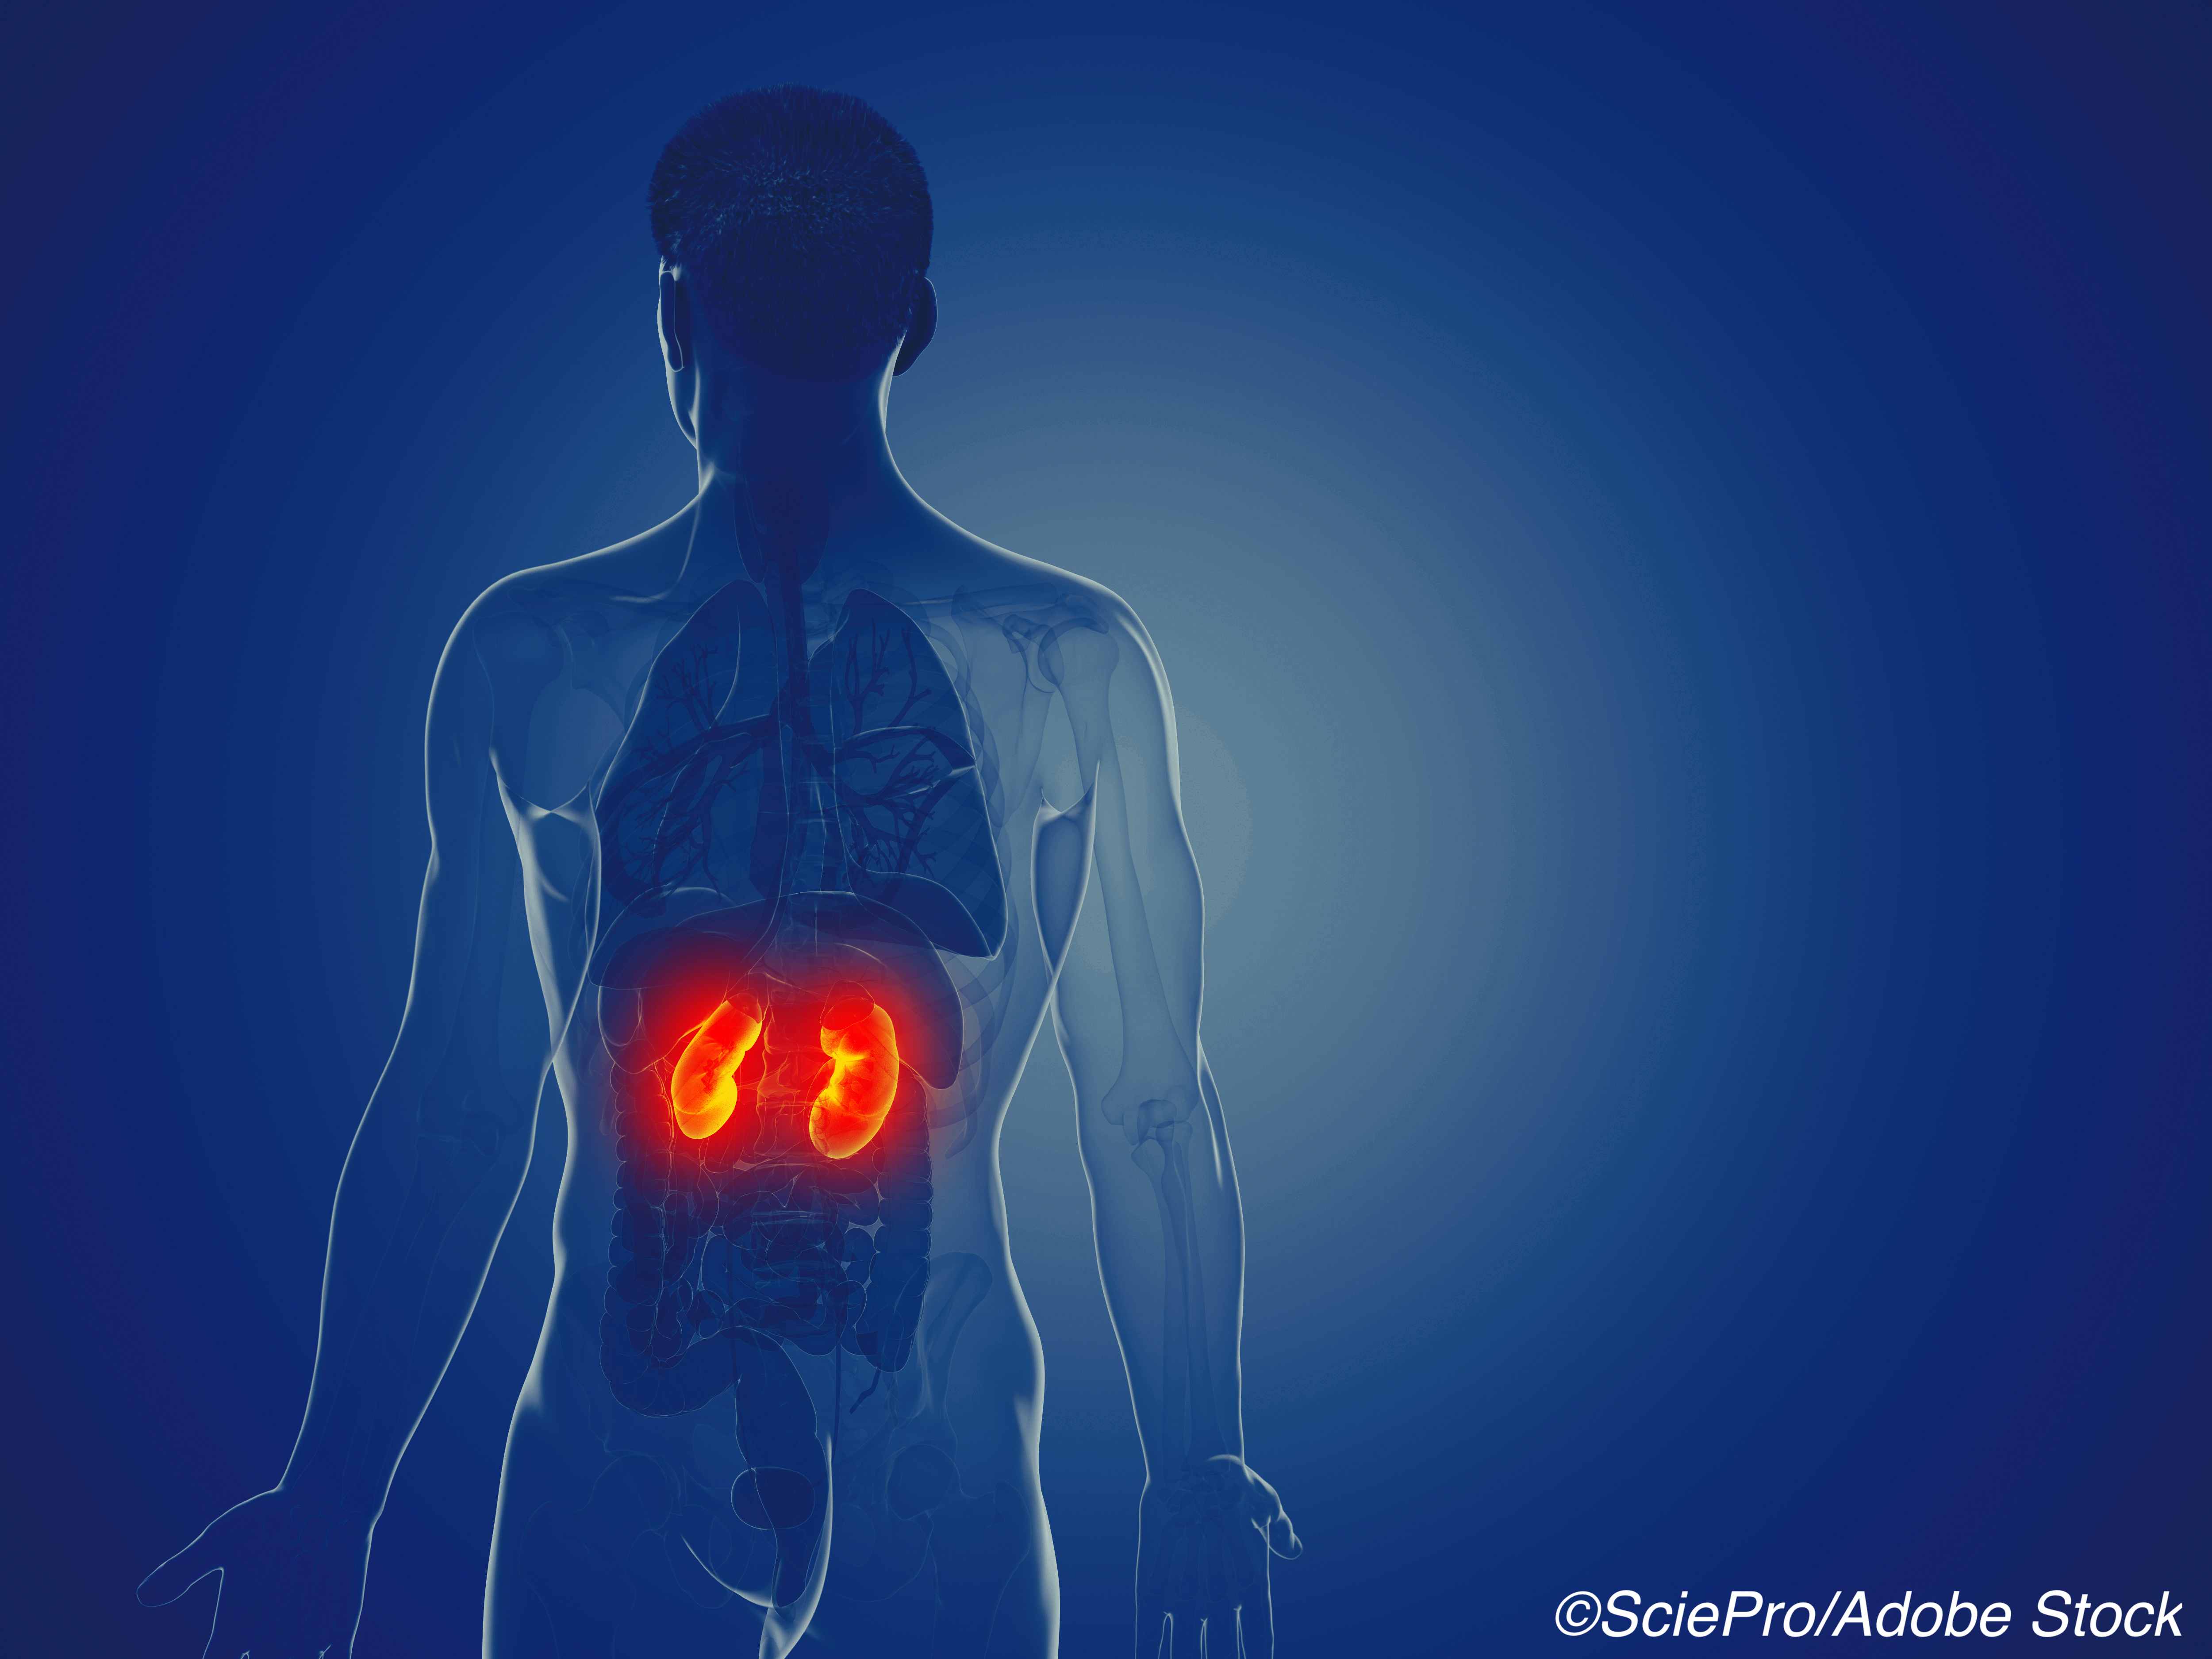 Is Belimumab as Add-On to Standard Tx for Lupus Nephritis Effective, Safe?